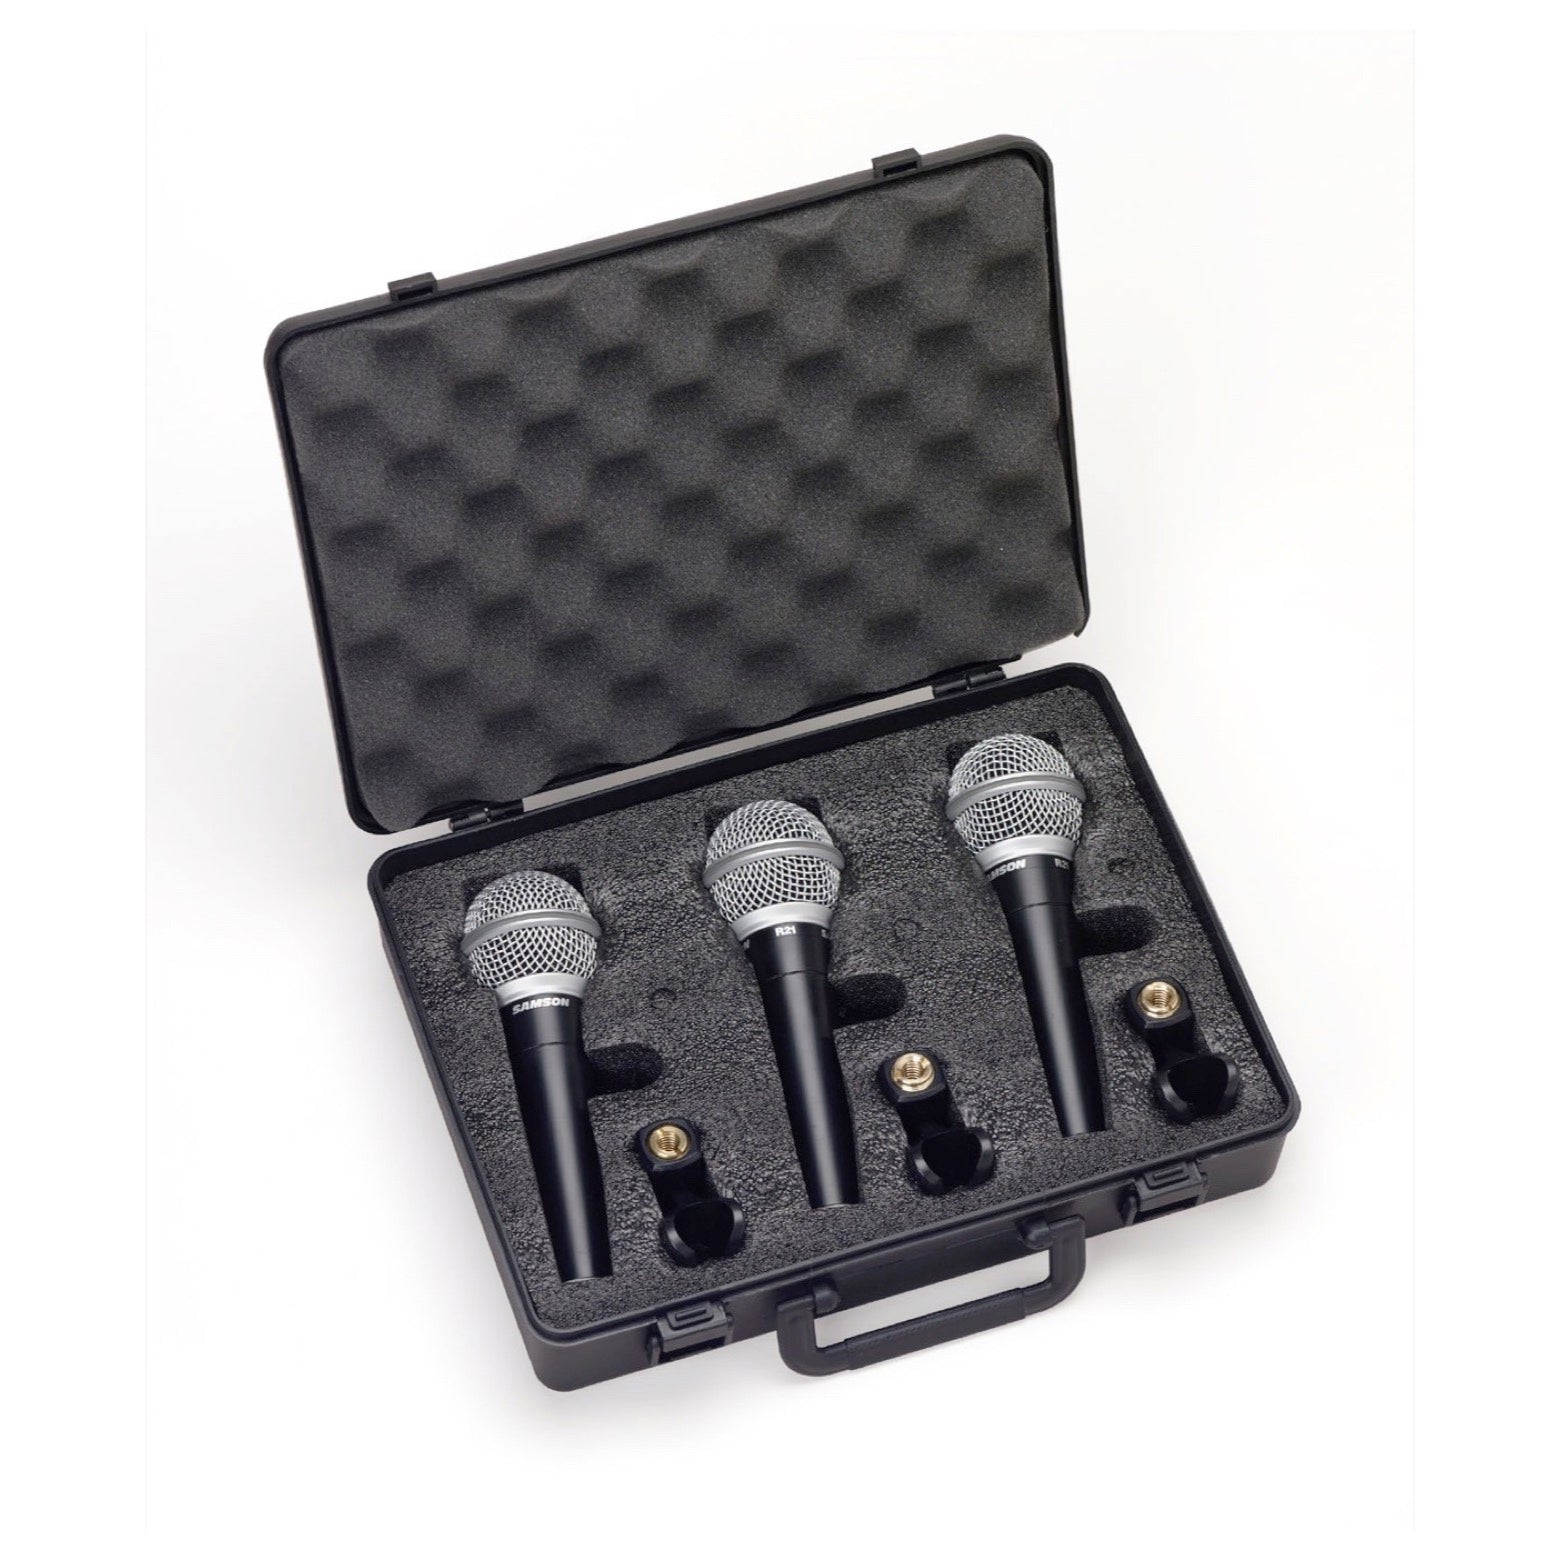 Samson R21 Microphones, 3-Pack, 3-Pack, with Case